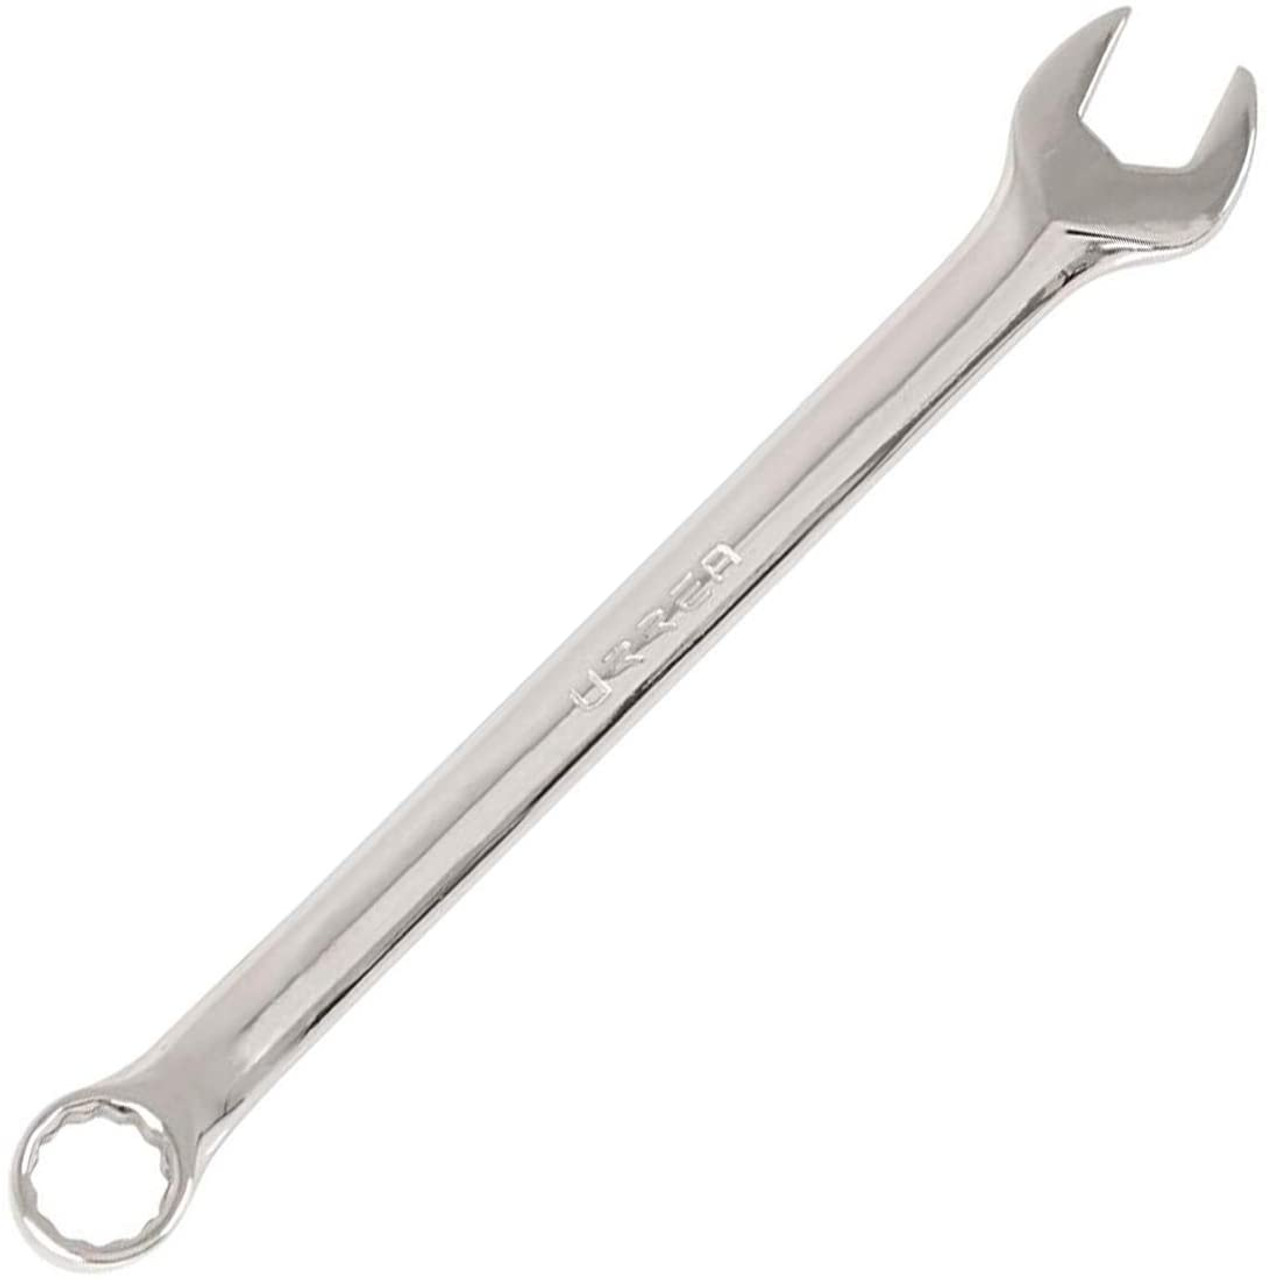 Full polished combination wrench, Size: 51mm, 12 point, Tool Length: 28"